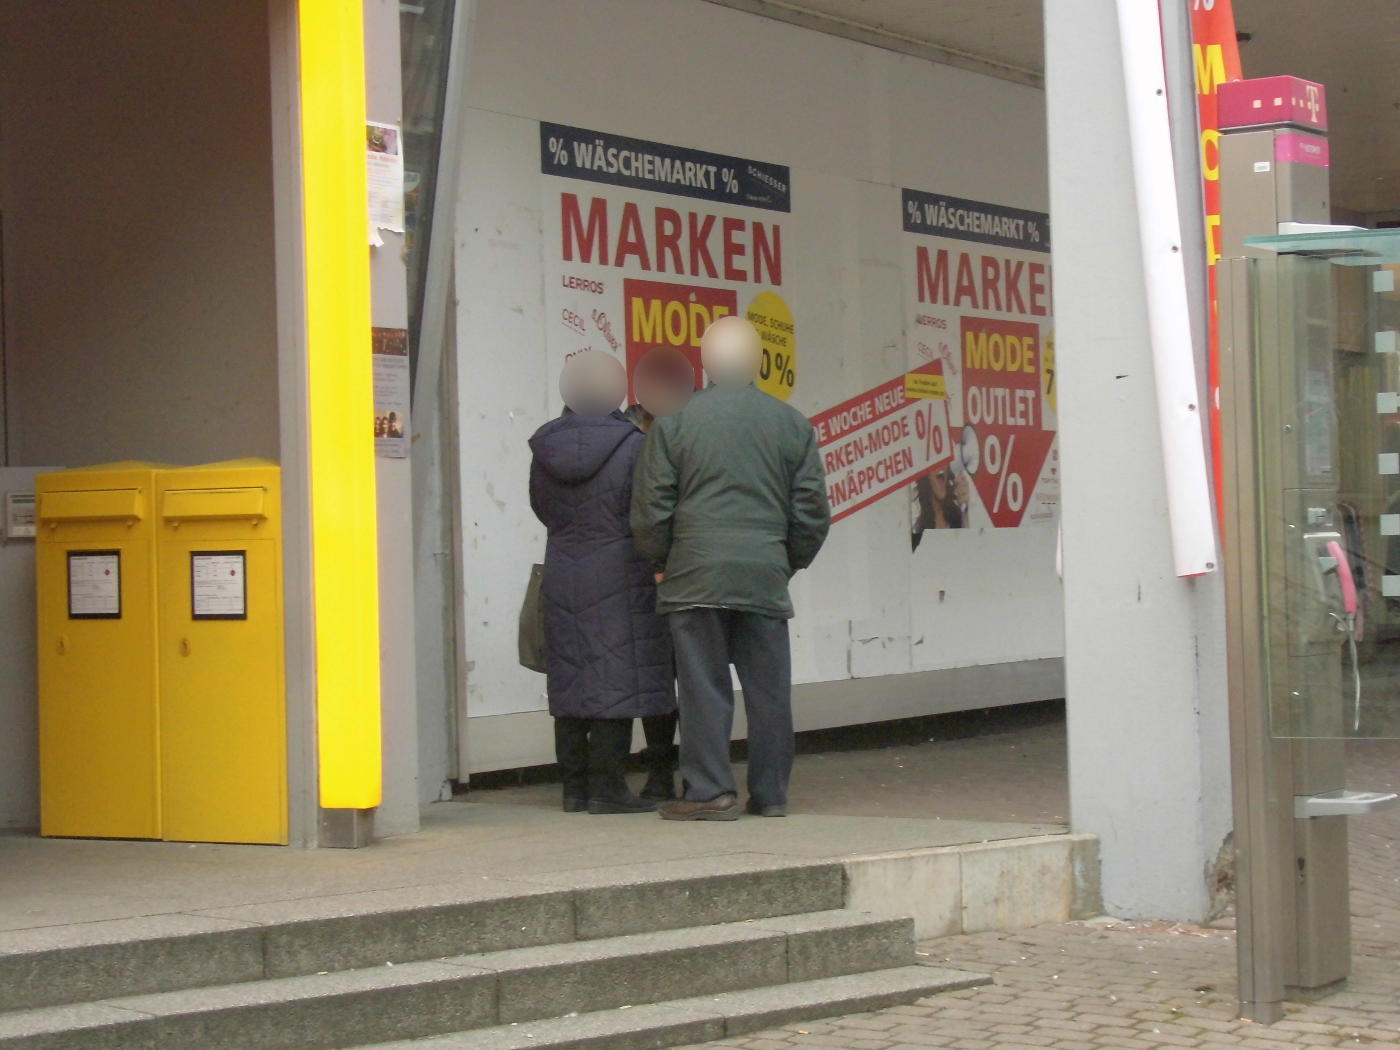 Scavenger hunt and Masonic group cult in Wiesloch